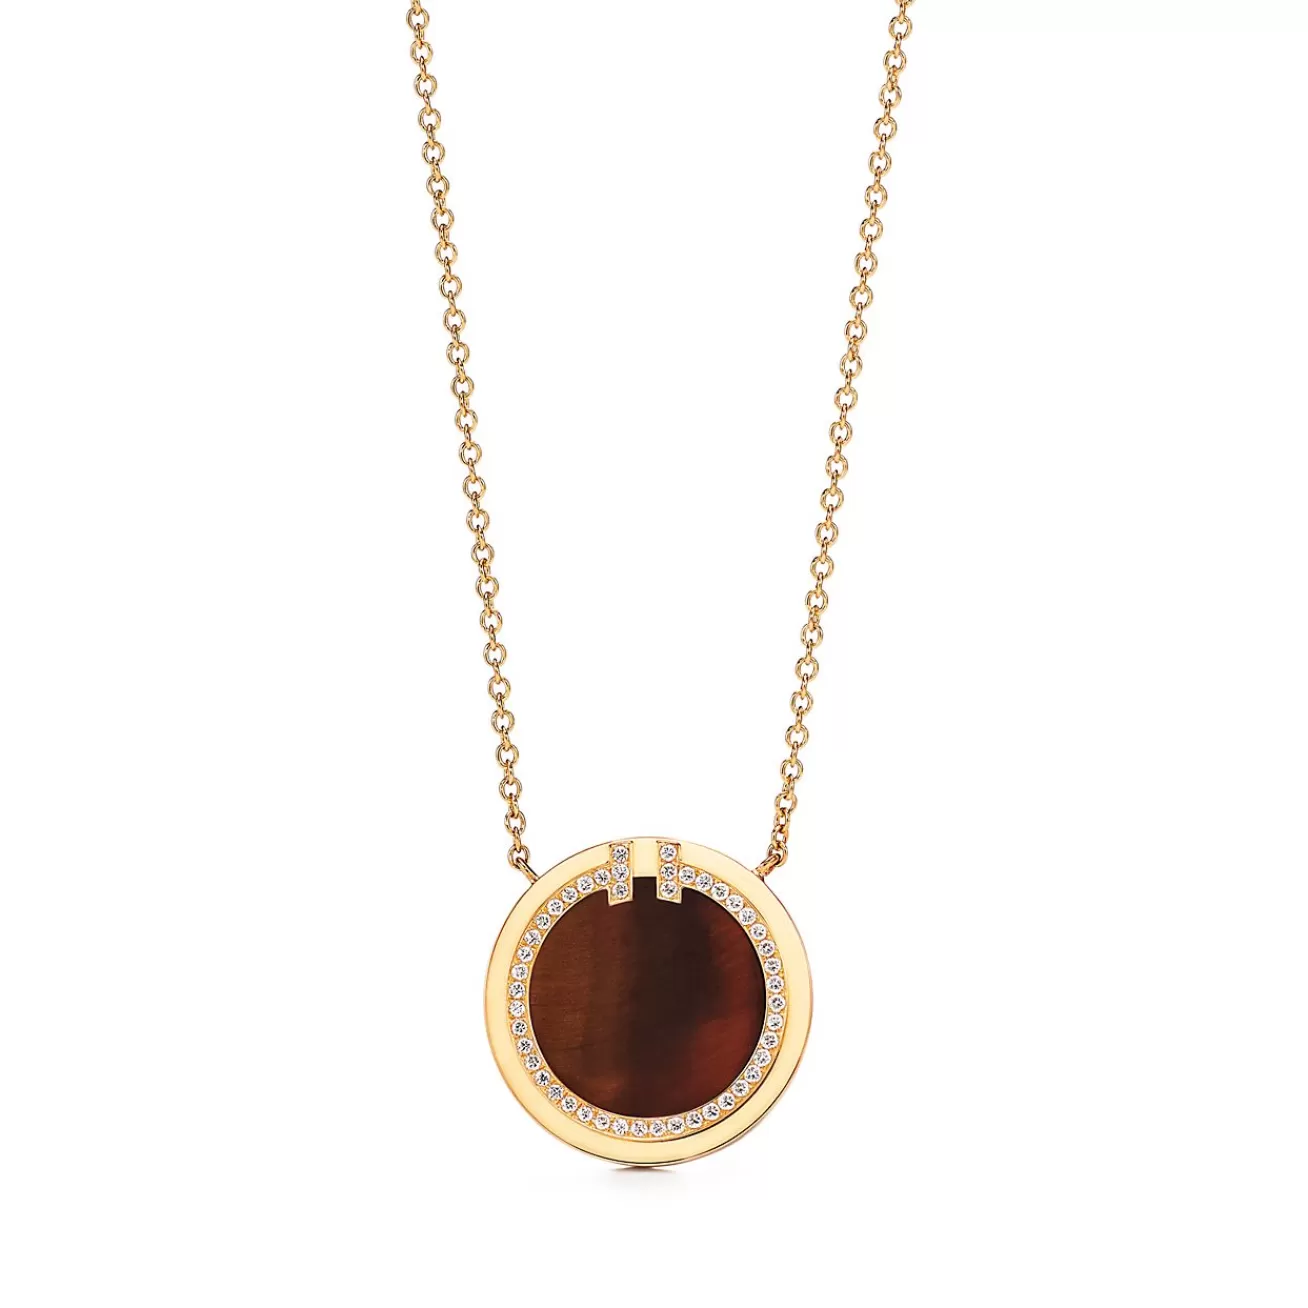 Tiffany & Co. Tiffany T diamond and tiger's eye circle pendant in 18k gold. | ^ Necklaces & Pendants | Gold Jewelry